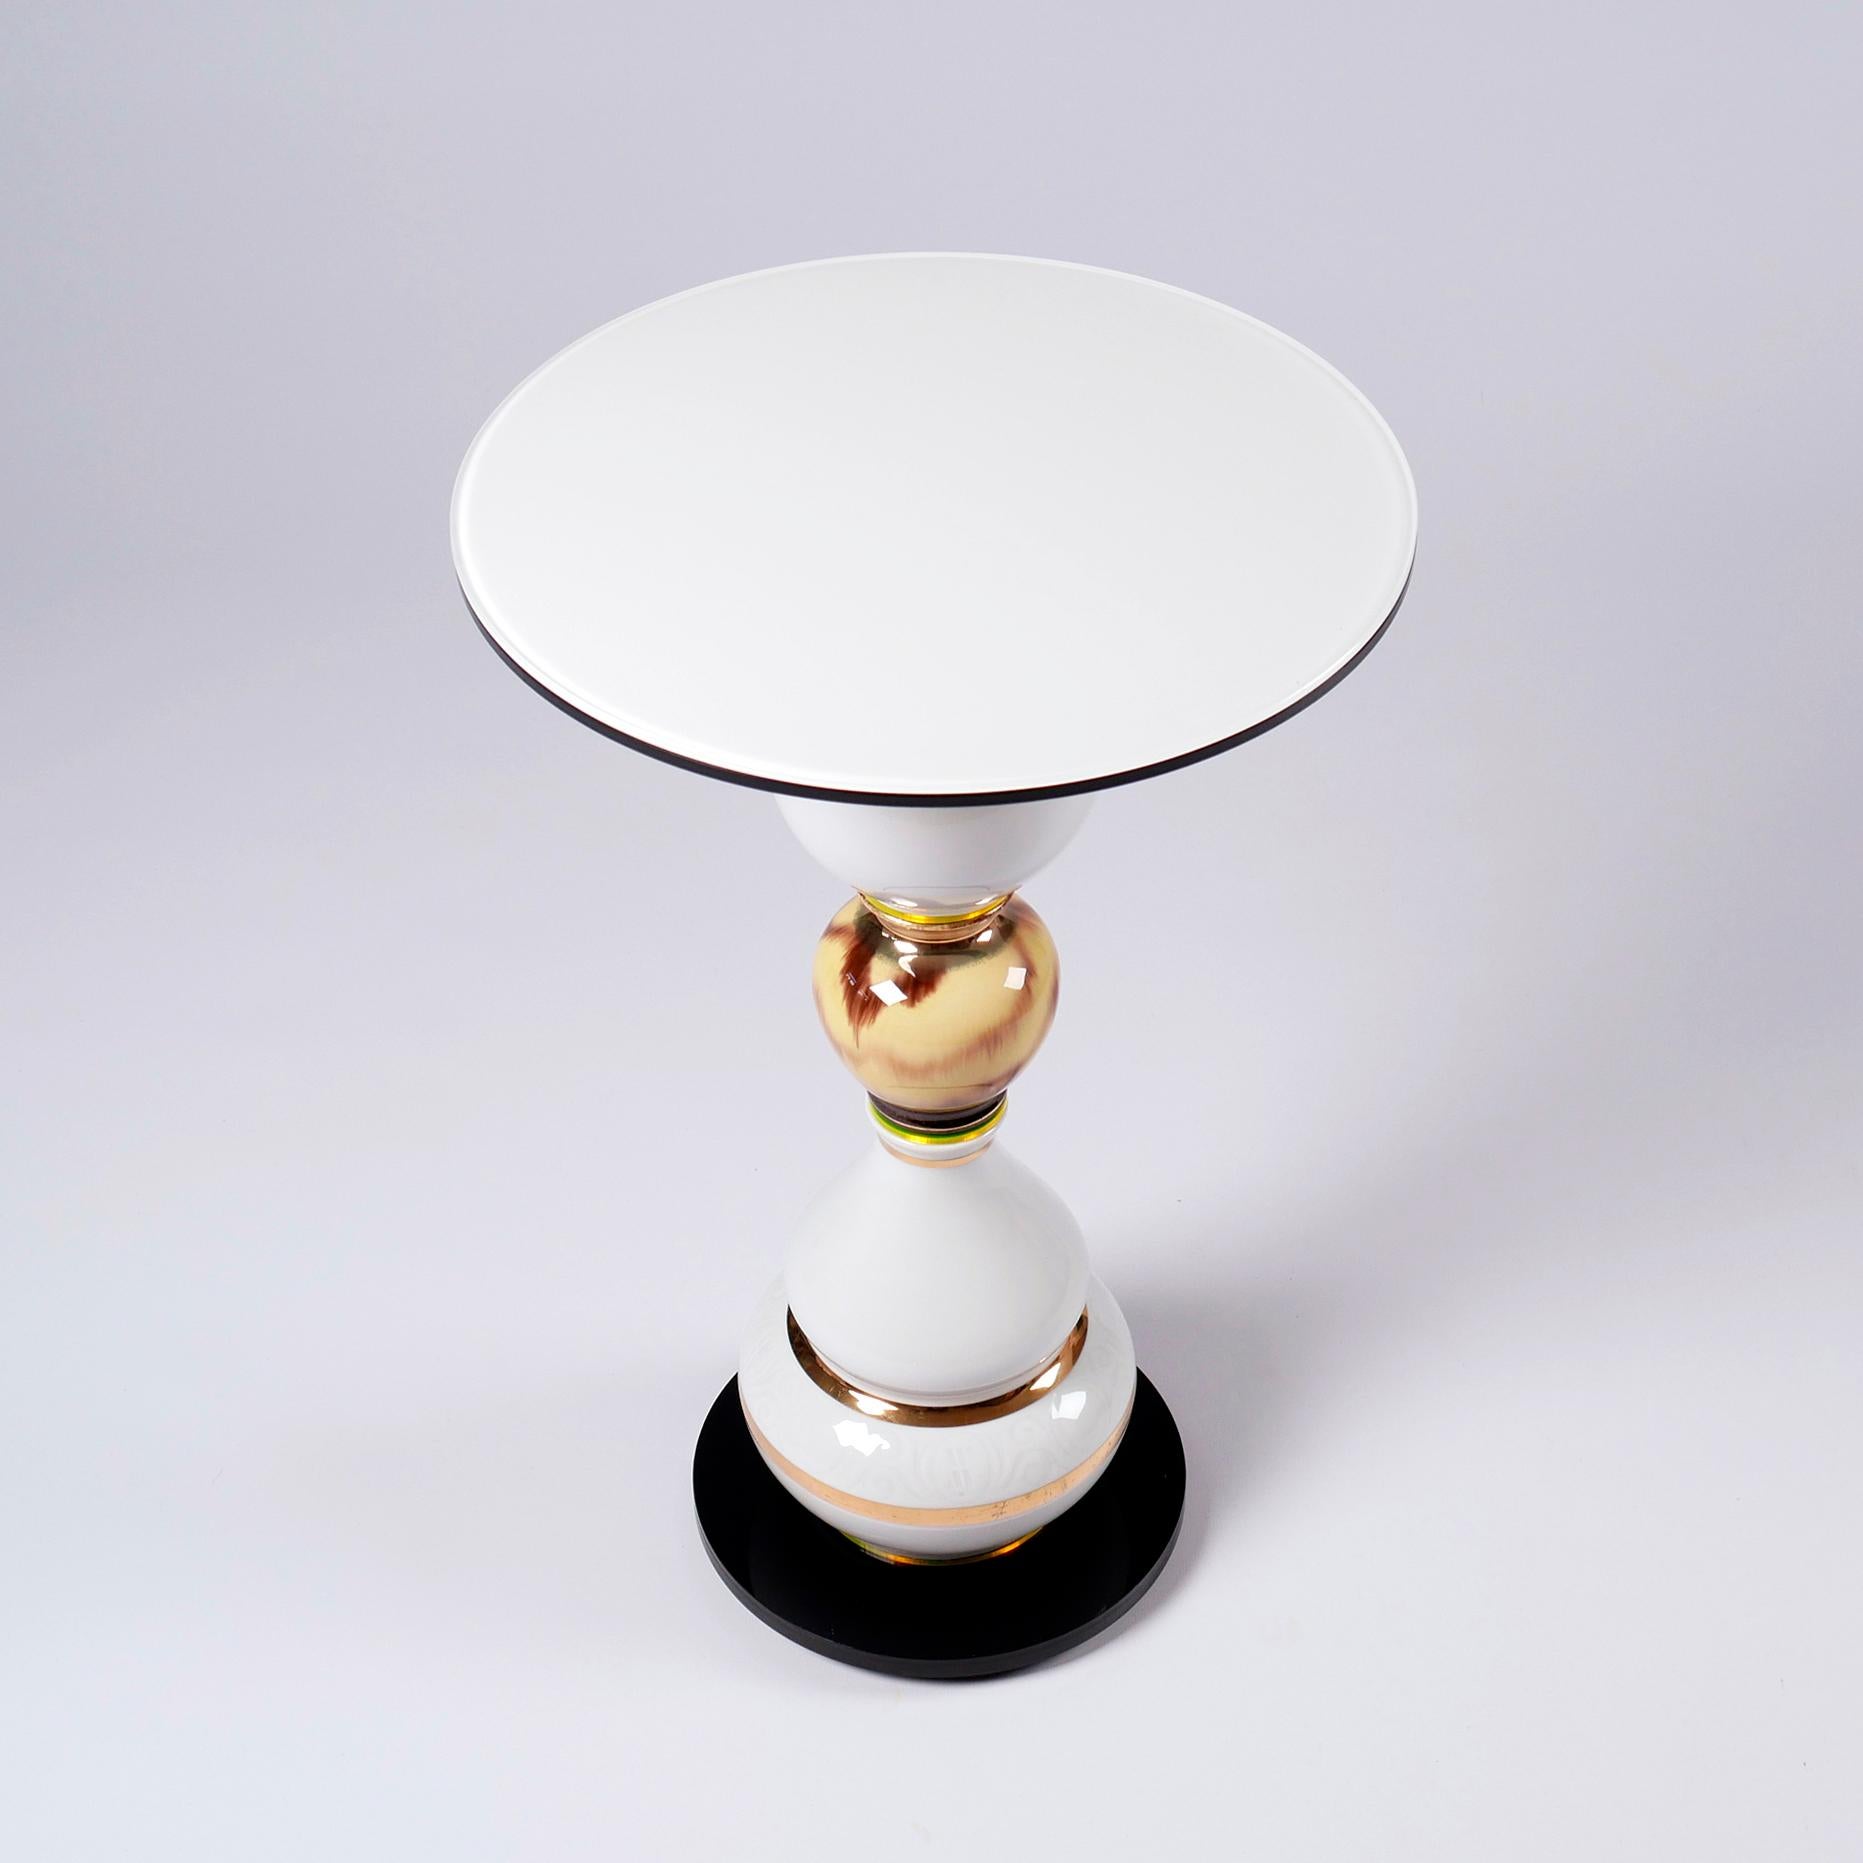 Mid-Century Modern 'Summer's Song' Side Table, Vintage Ceramics and Glass, One Off Piece